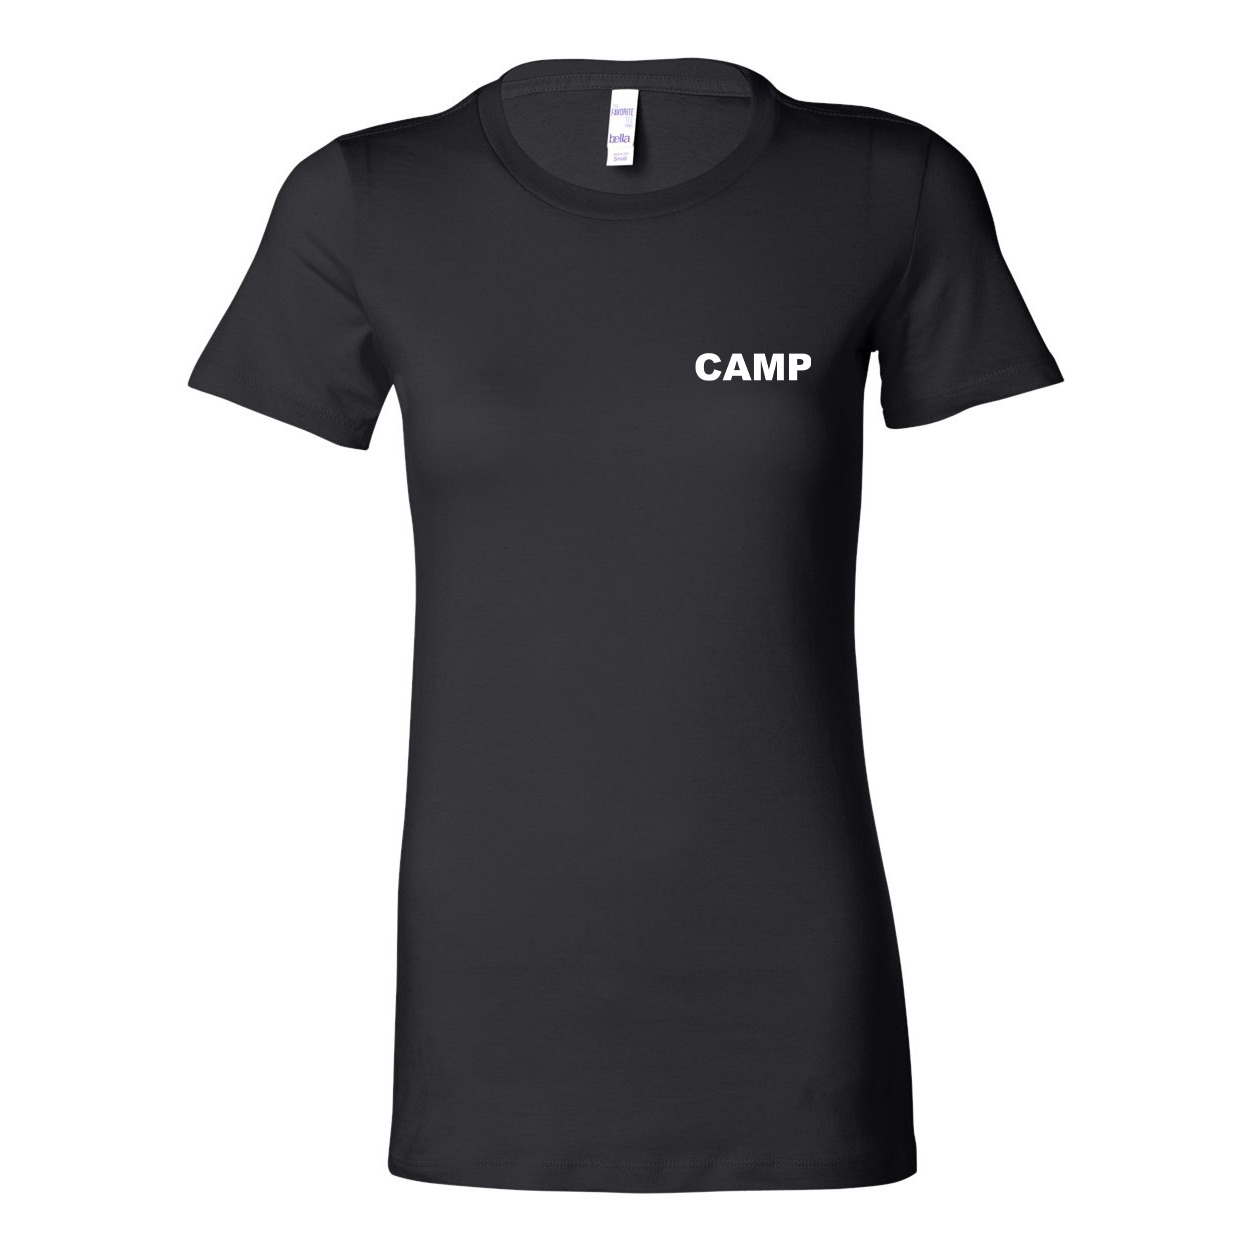 Camp Brand Logo Women's Night Out Fitted Tri-Blend T-Shirt Black